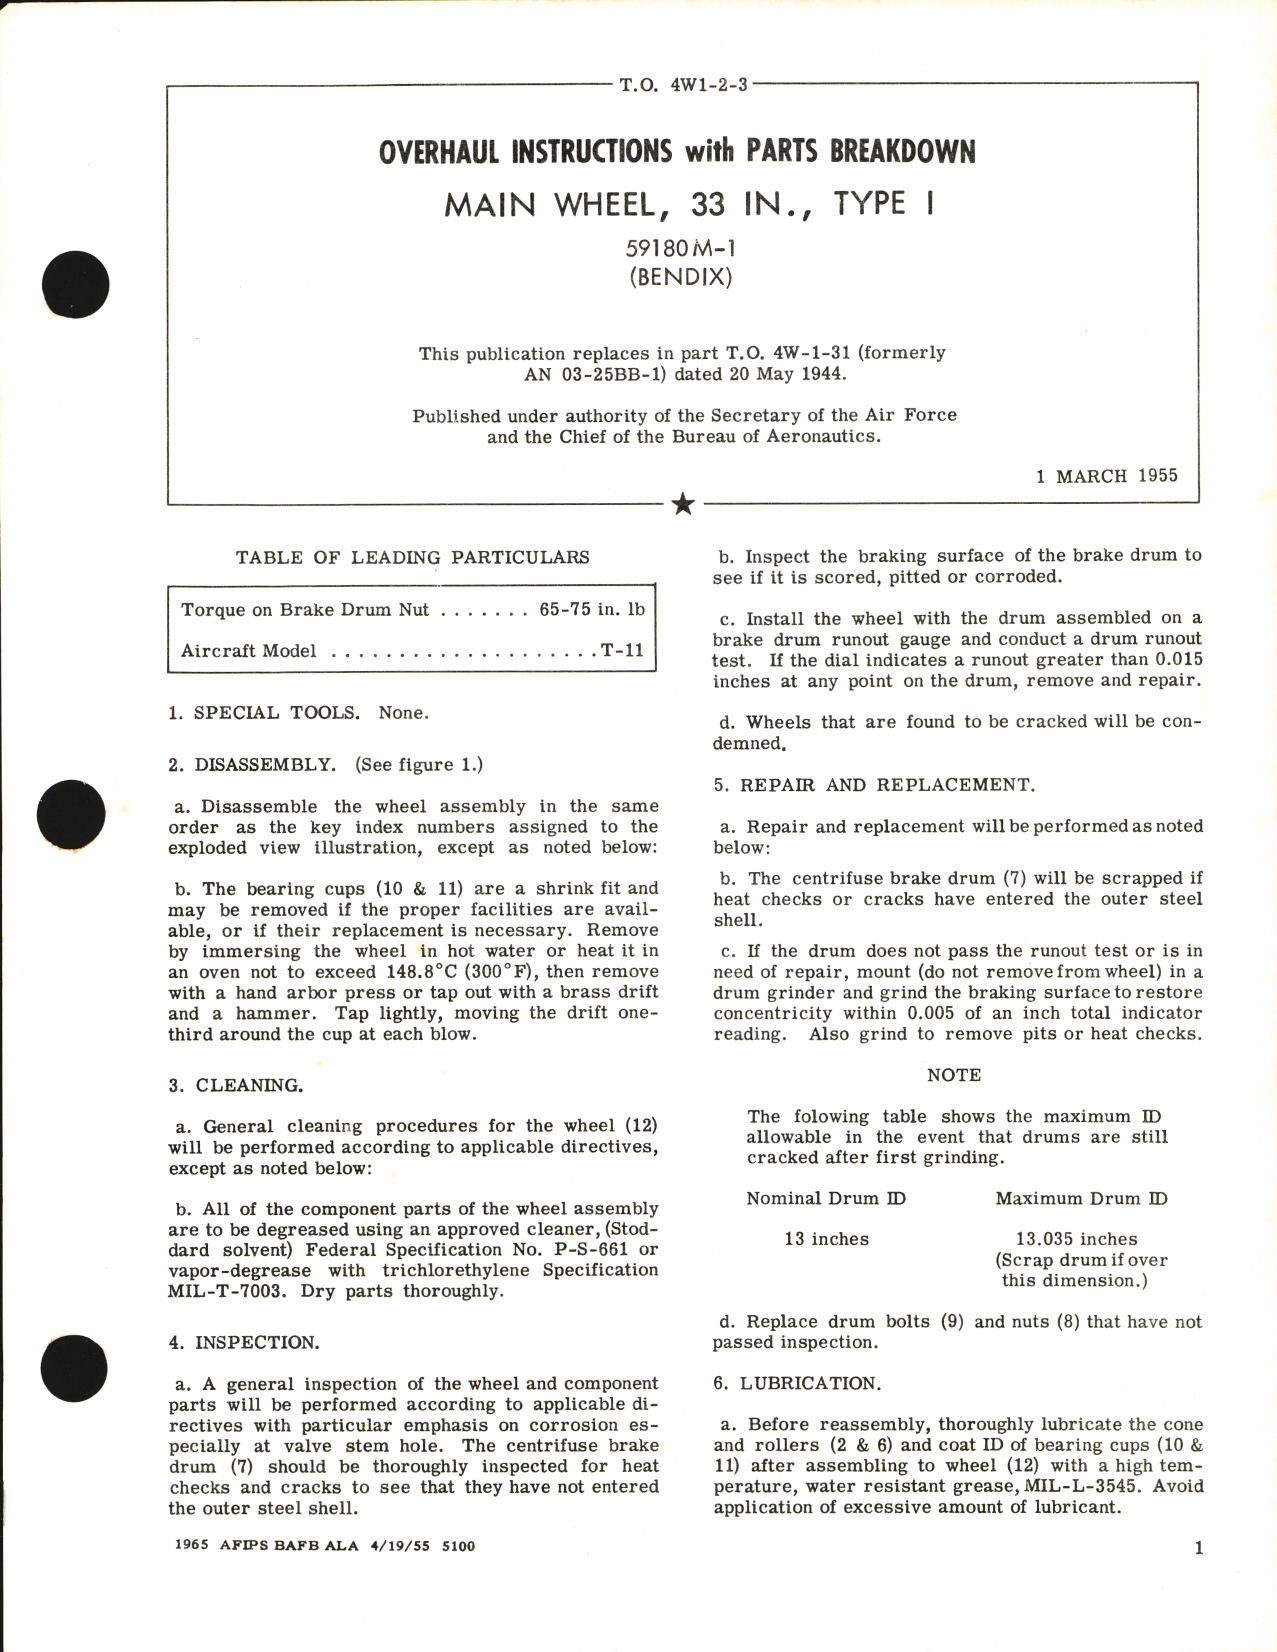 Sample page 1 from AirCorps Library document: Overhaul Instructions with Parts Breakdown for Main Wheel, 33 in, Type I